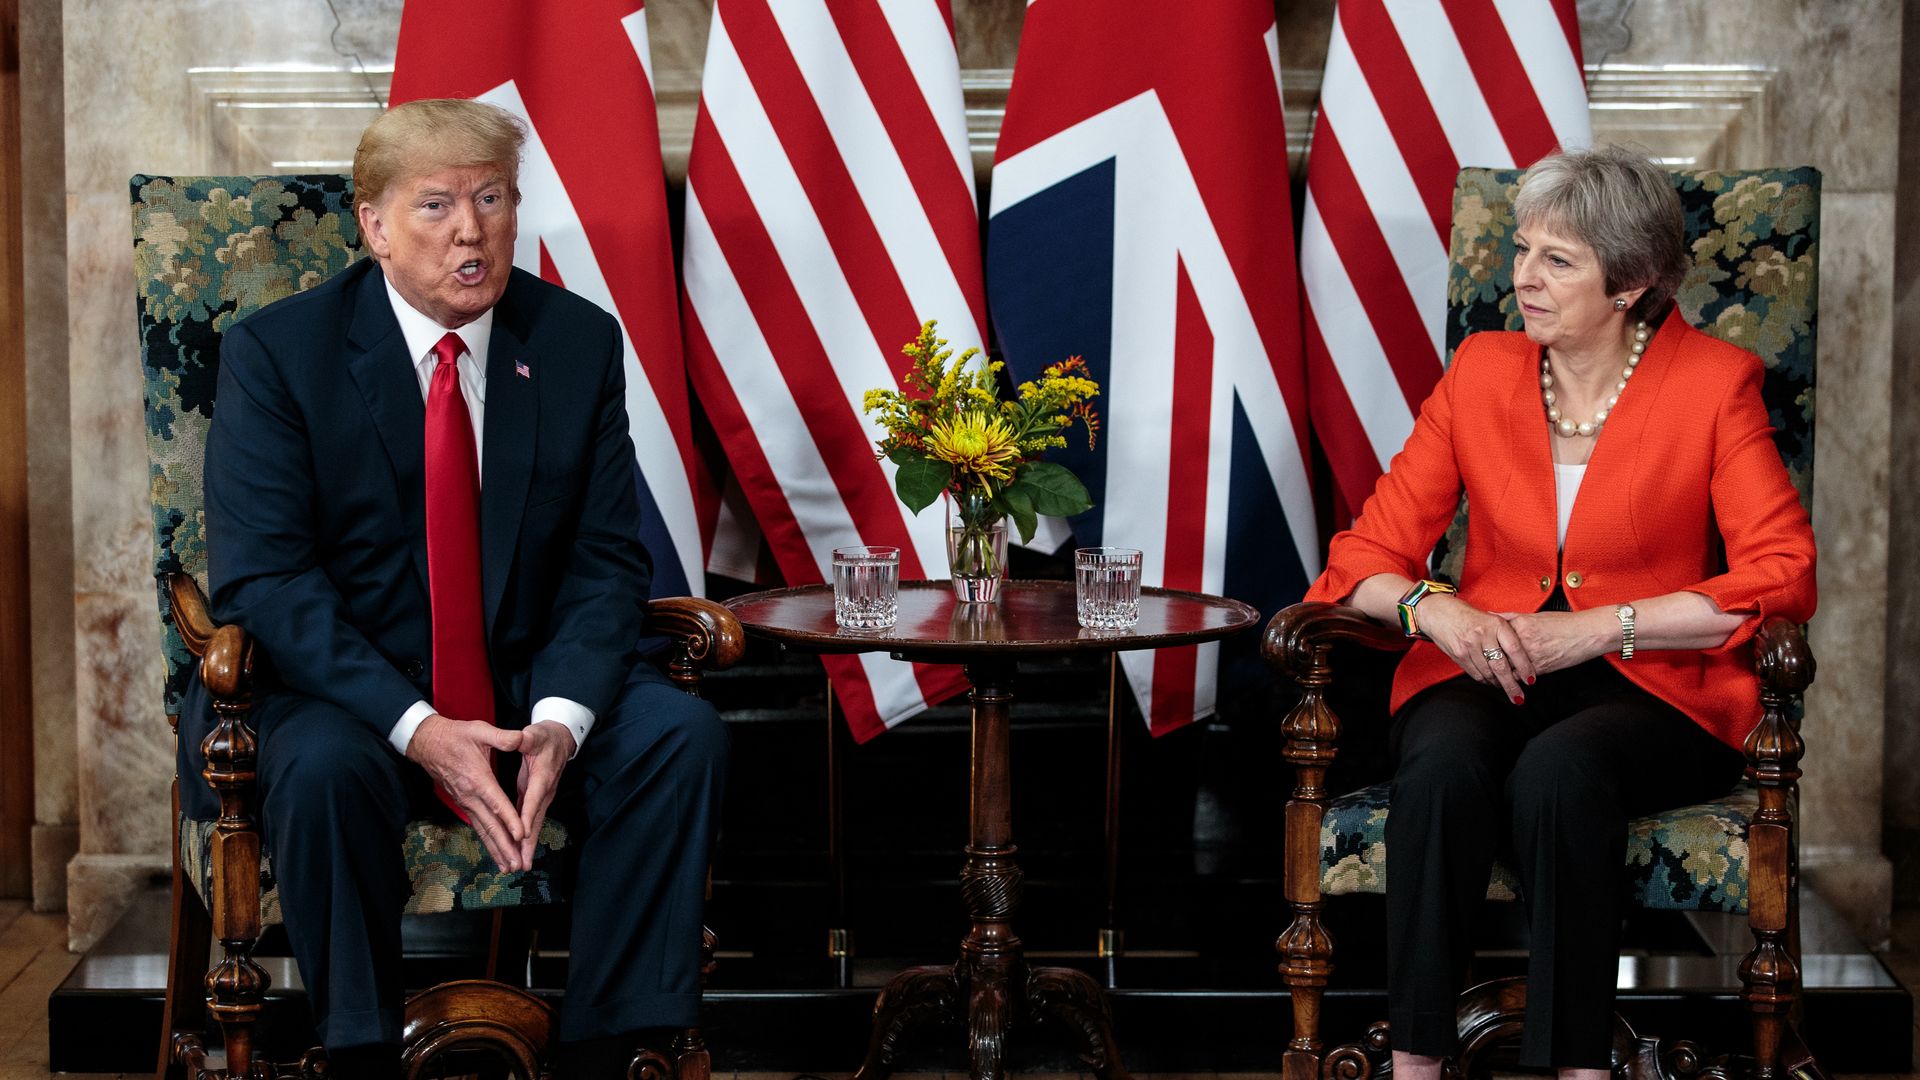 Trump and Theresa May sit together for a press conference